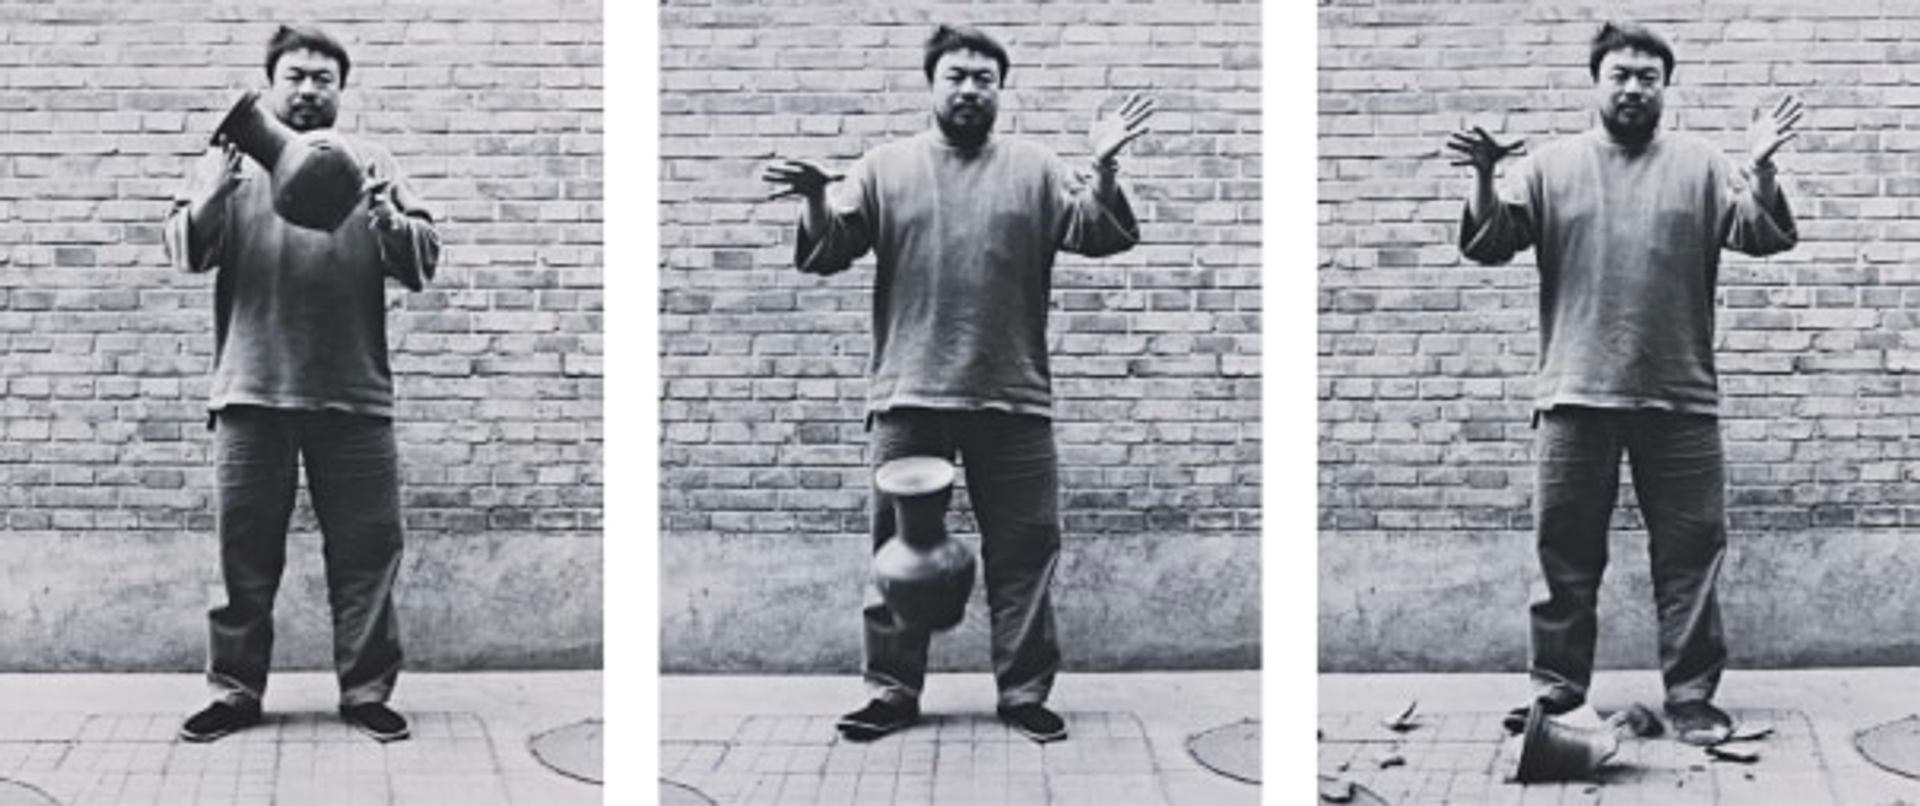 Dropping a Han Dynasty Urn by Ai Weiwei (1995). Three consecutive photographs of artist Ai Weiwei dropping an urn onto the floor.